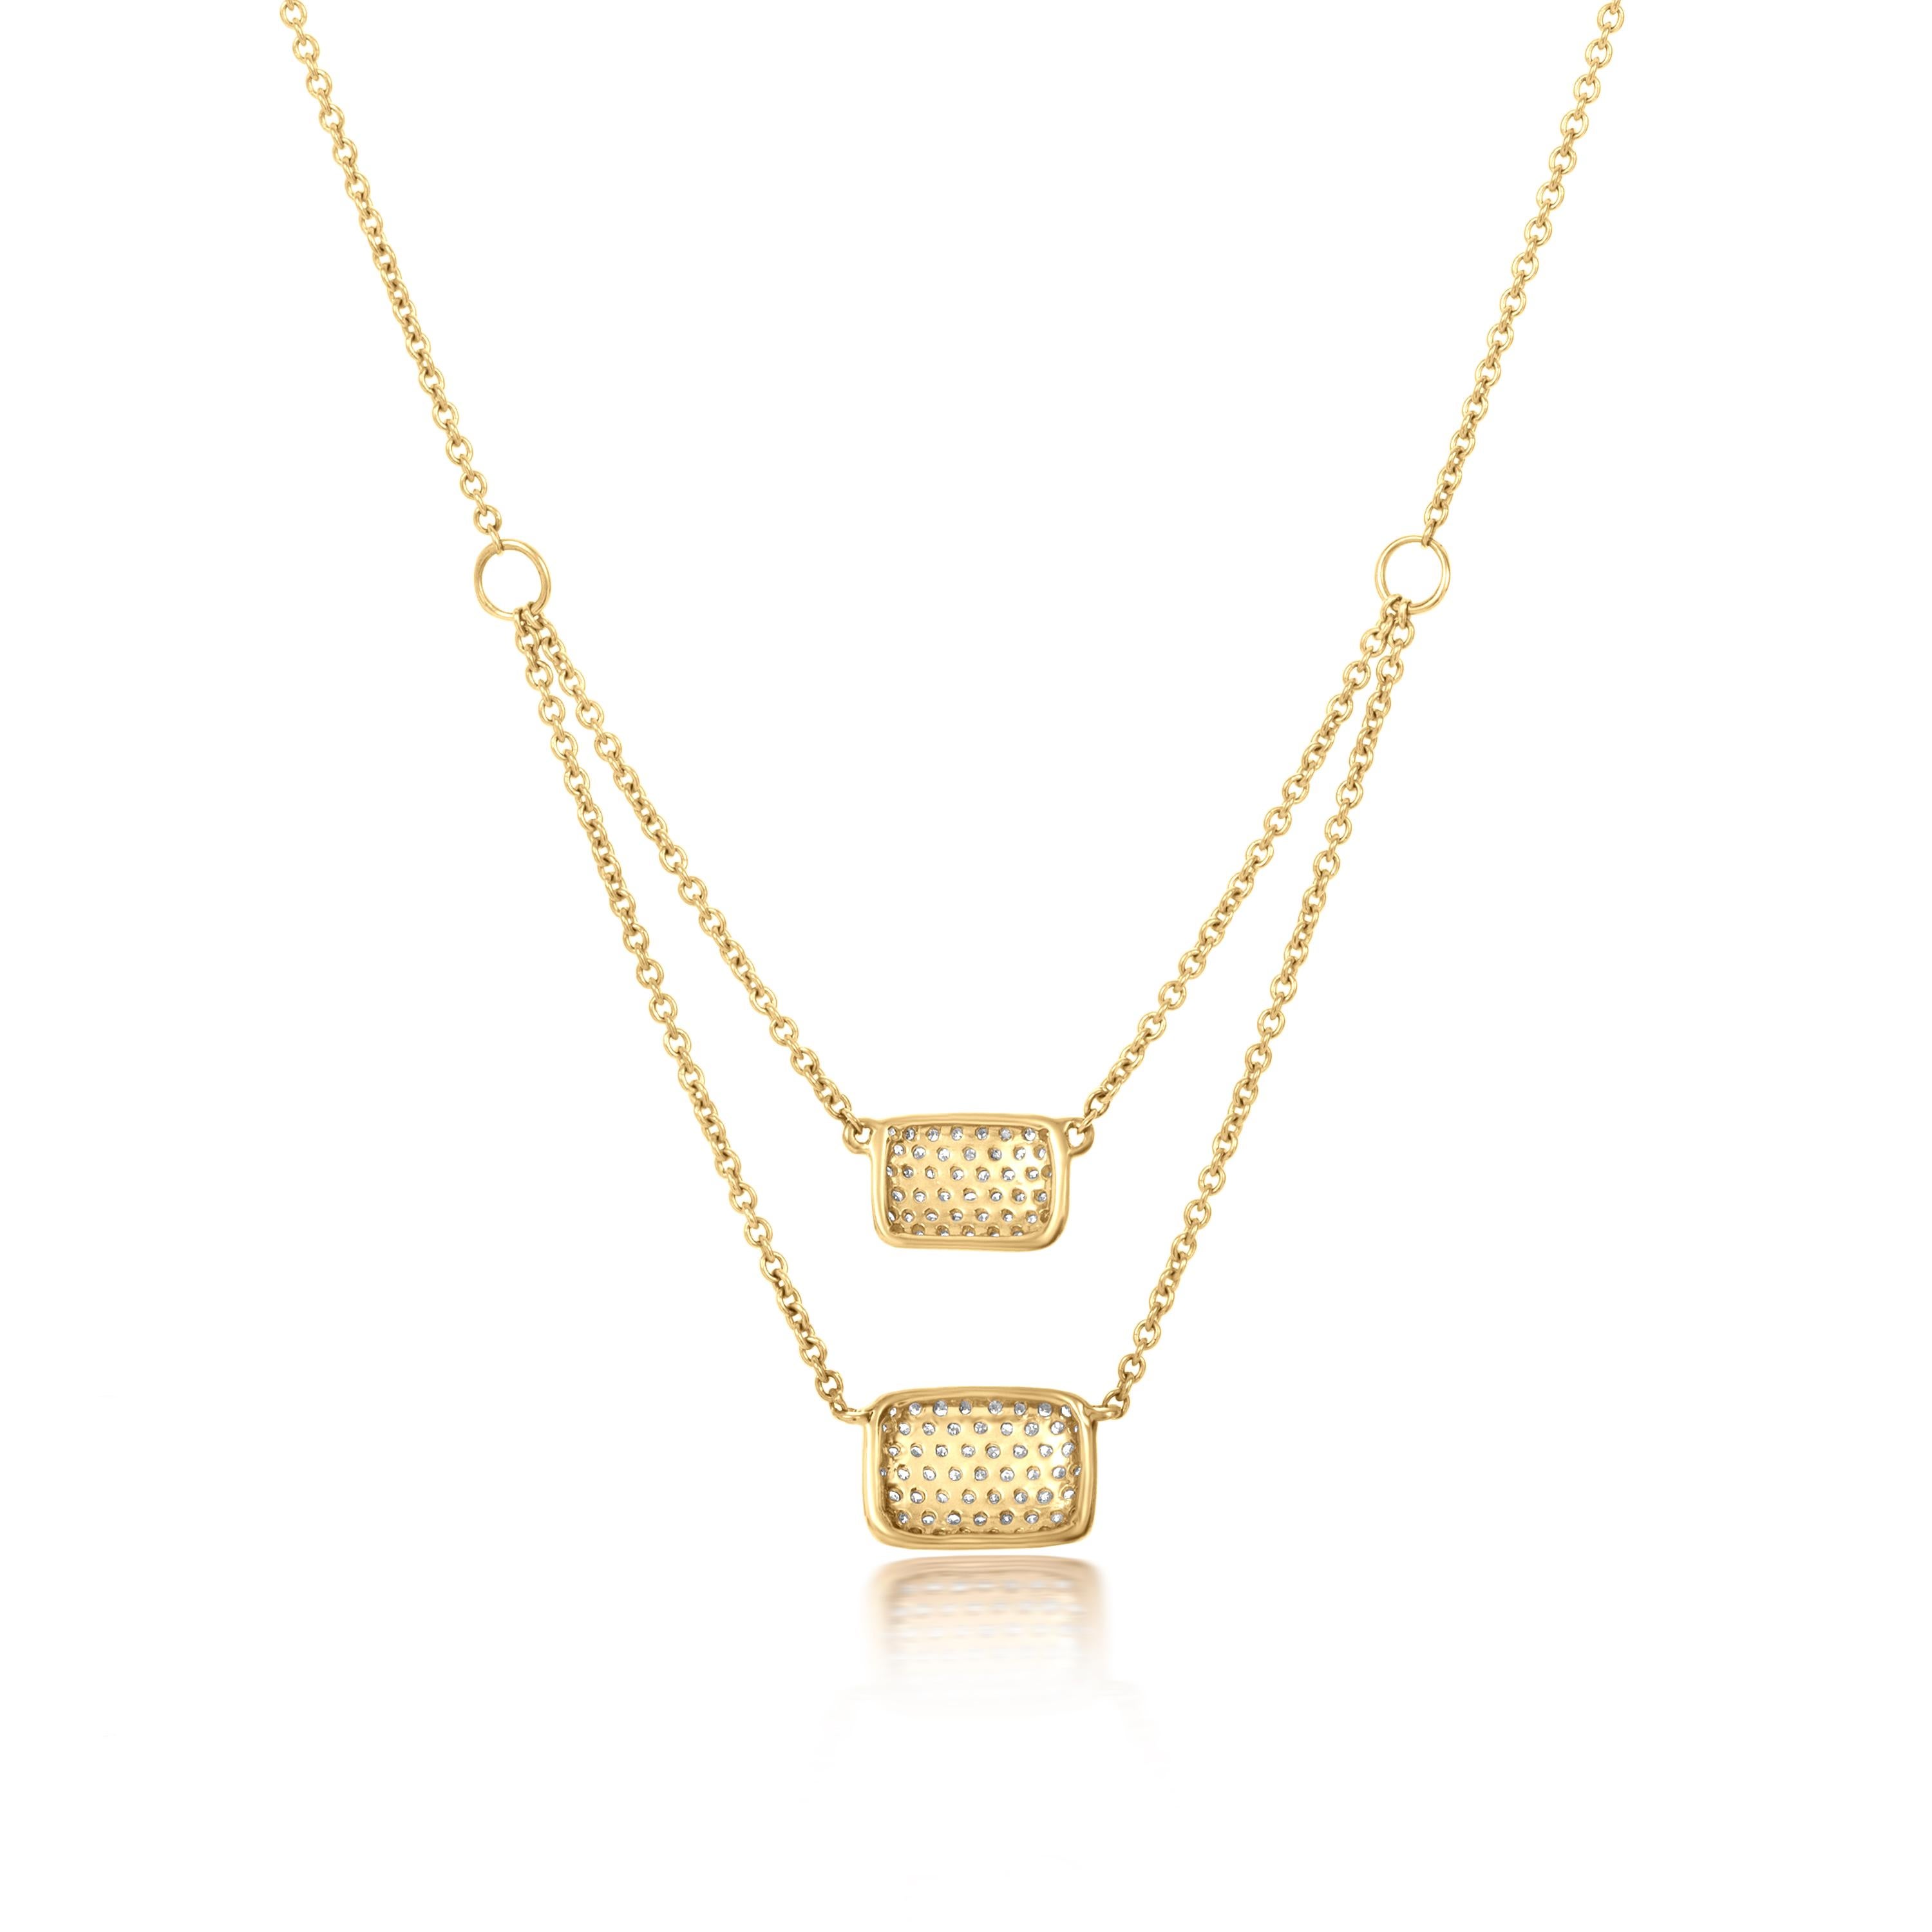 This Luxle double-Strand square cluster necklace is one of a kind, meticulously created in 14K Yellow Gold. This necklace features 0.29 carats of round single-cut diamonds that are perfectly aligned to illuminate light from every angle.
Please